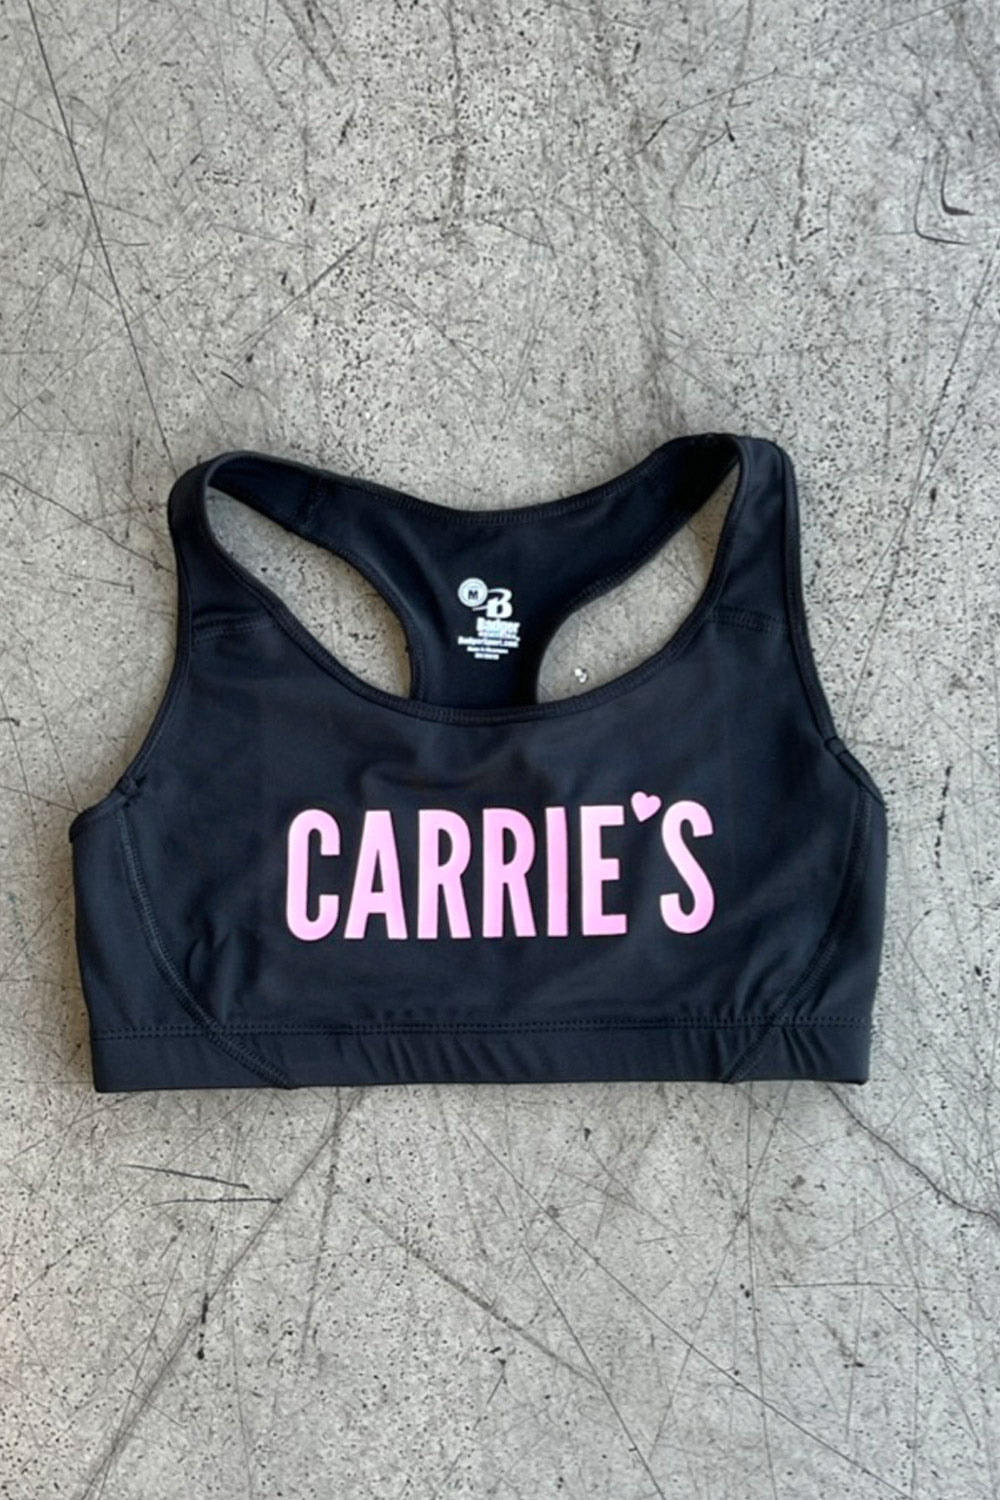 CARRIEʻS SPORTS BRA - BLACK WITH PINK LETTERS